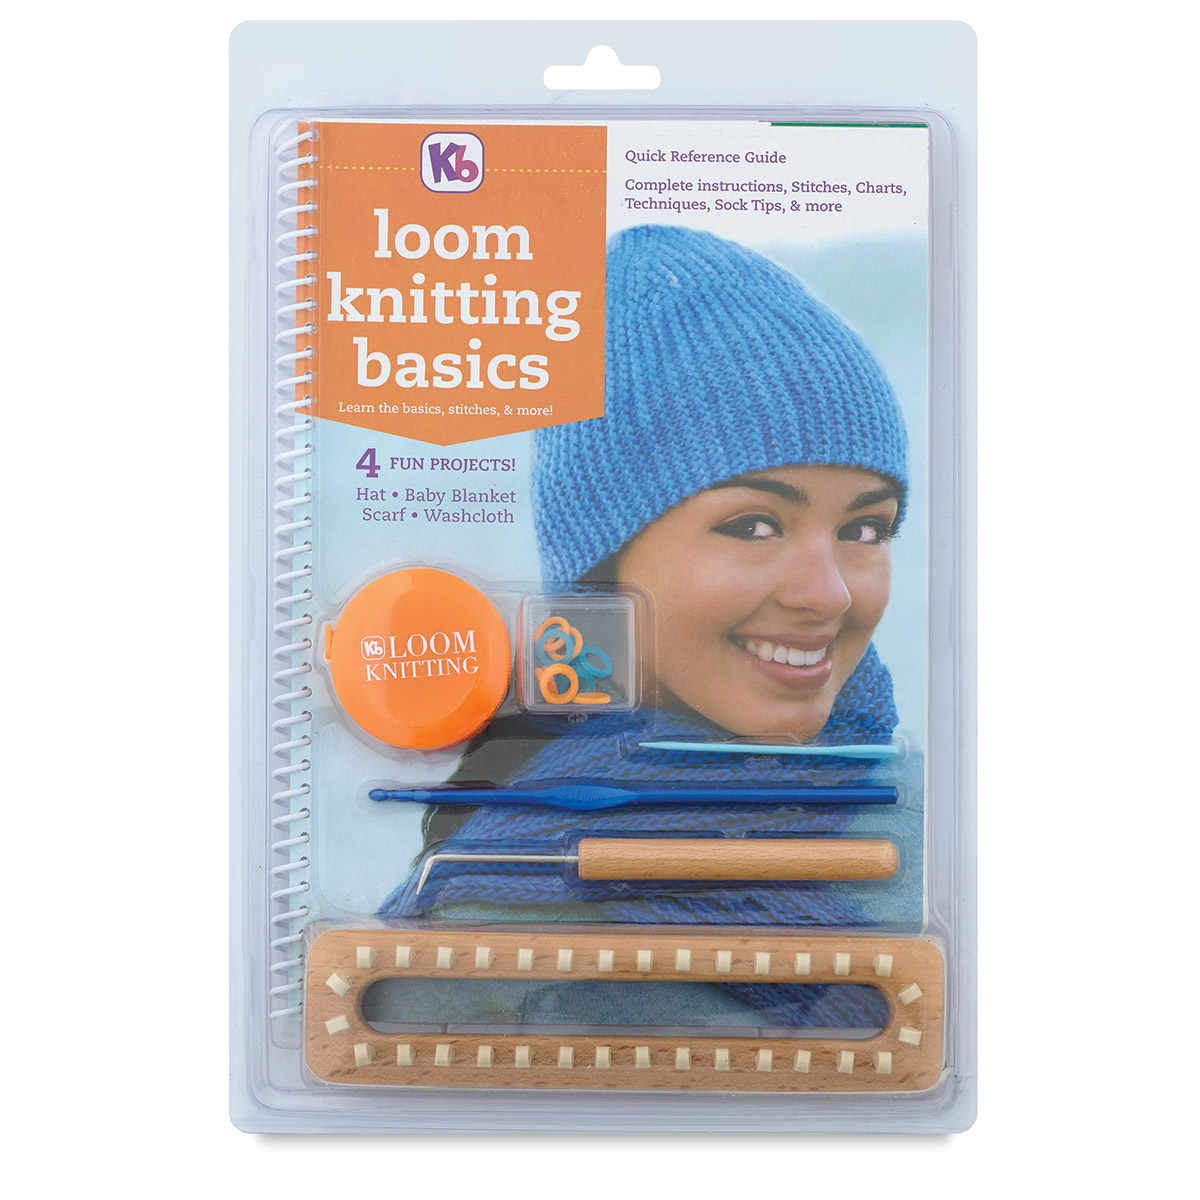 Introduction to Loom Knitting - Knitting Board